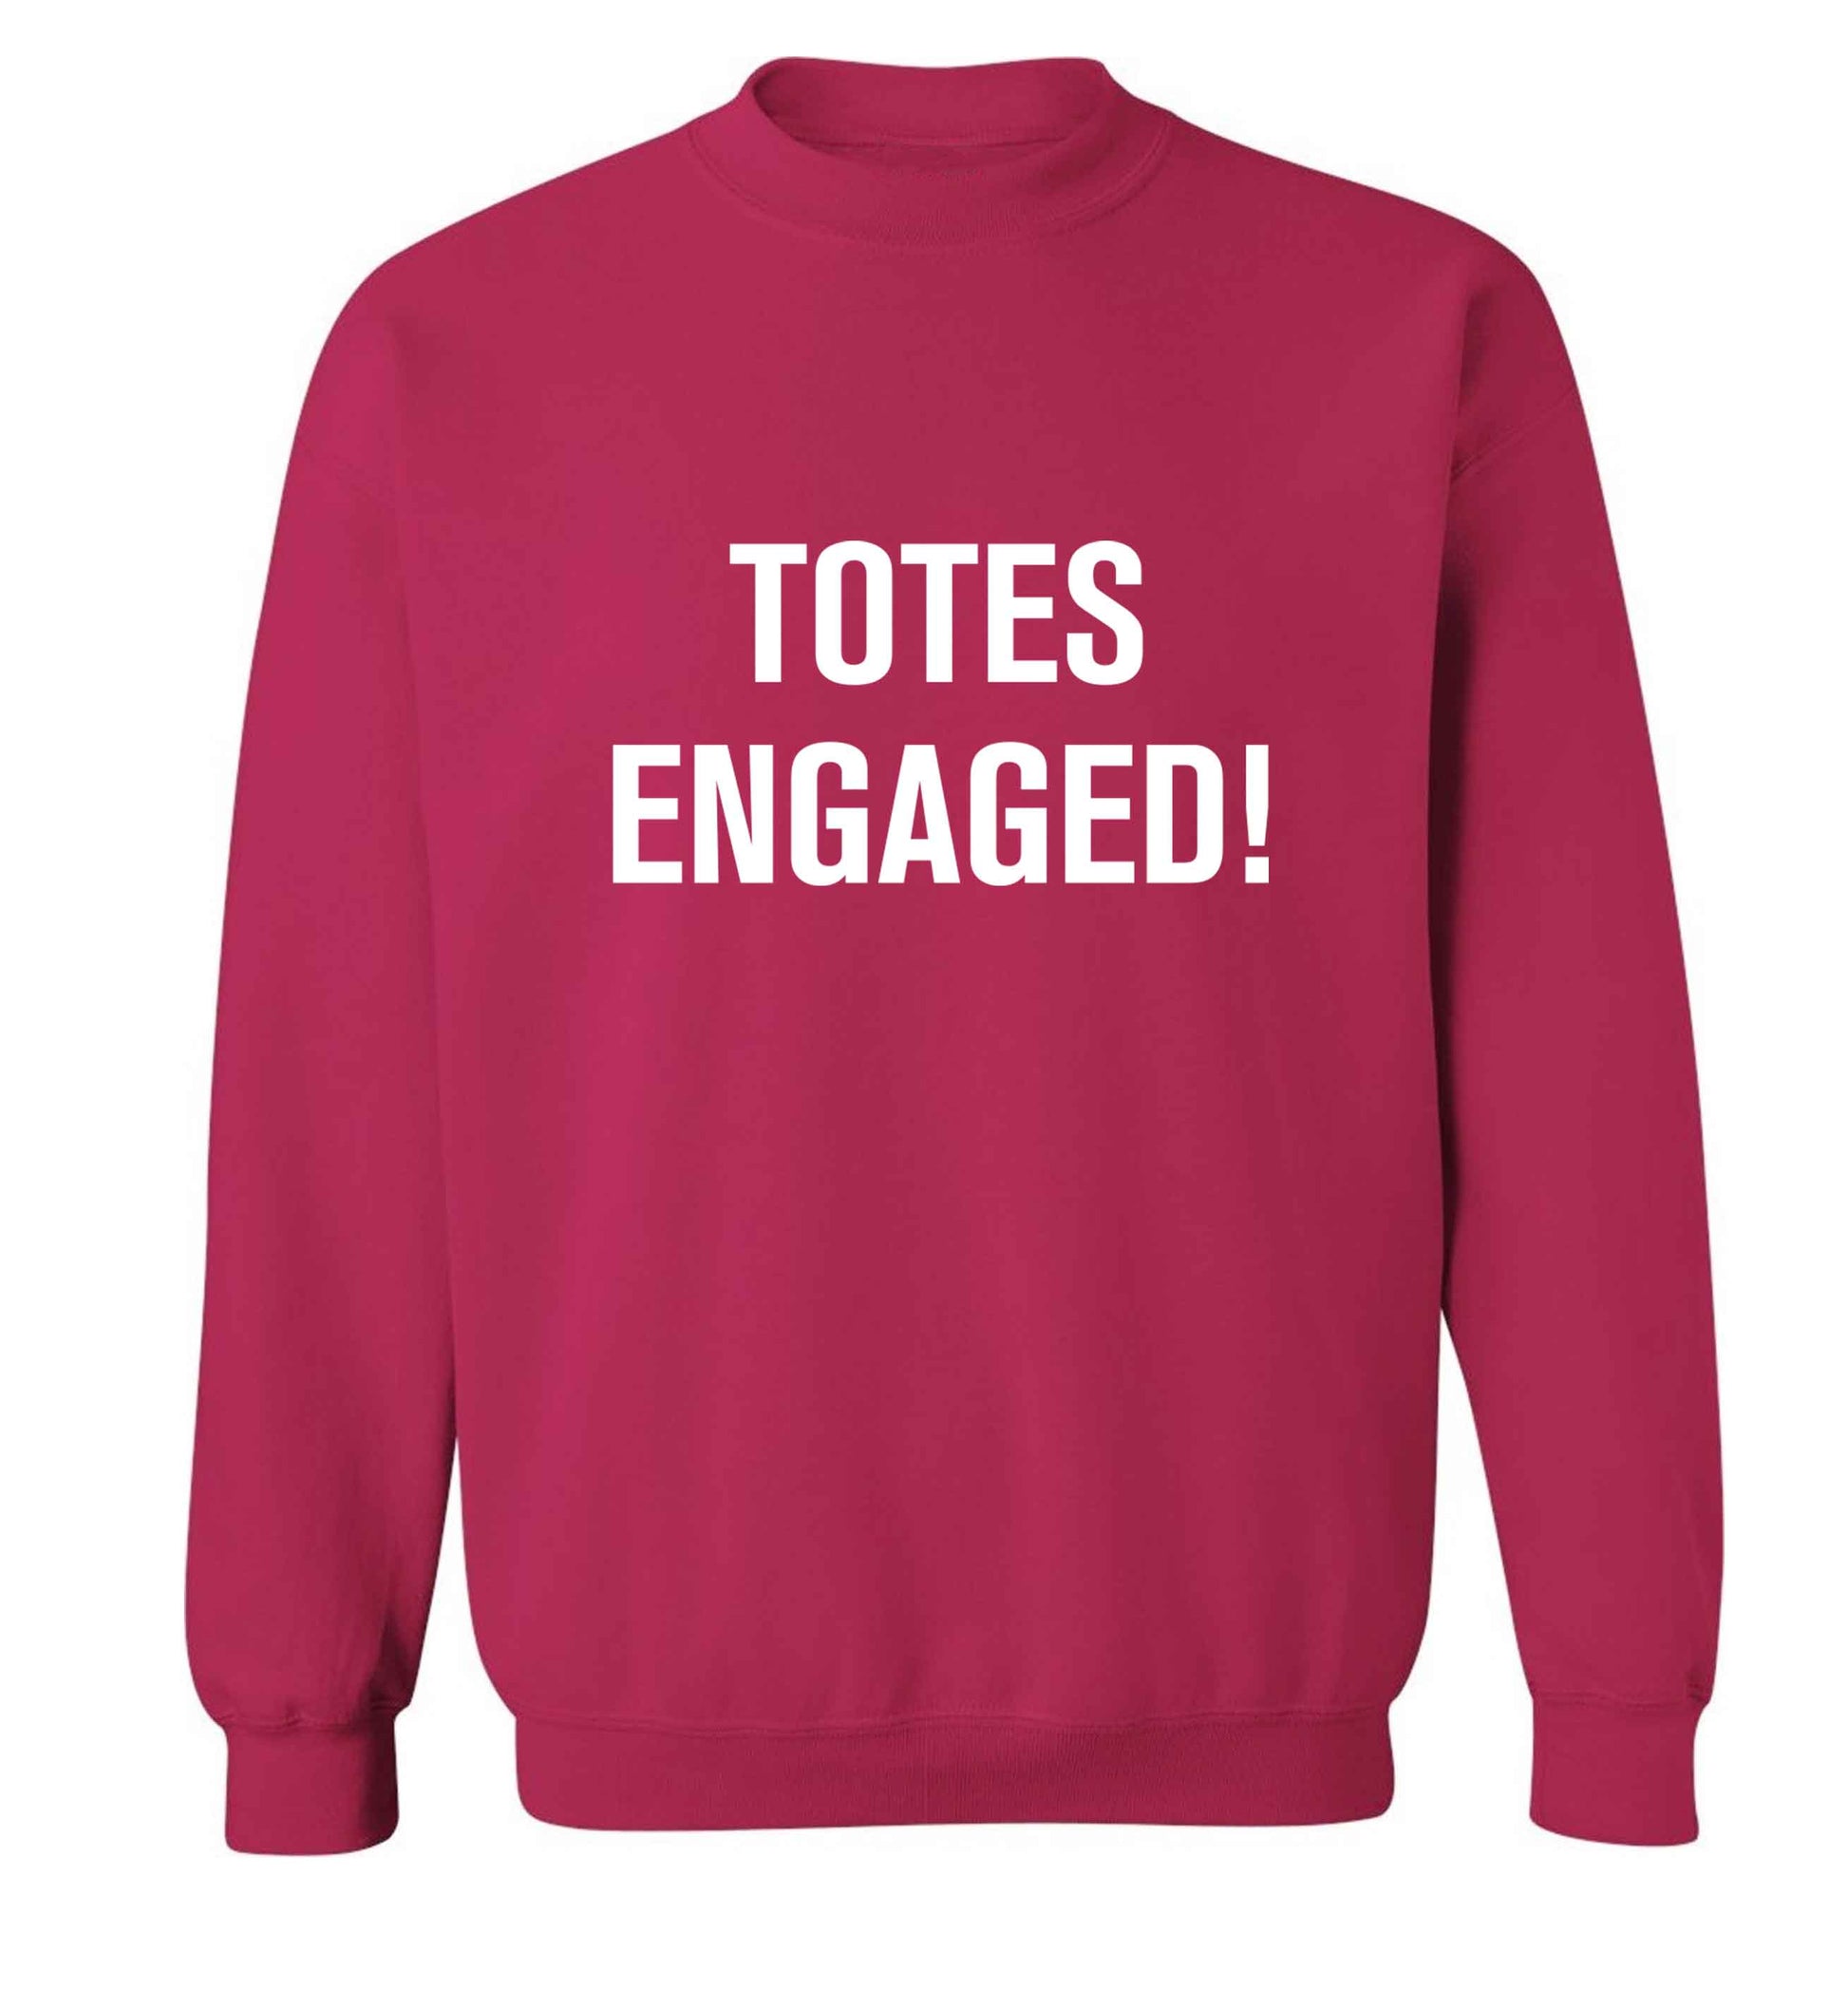 Totes engaged adult's unisex pink sweater 2XL